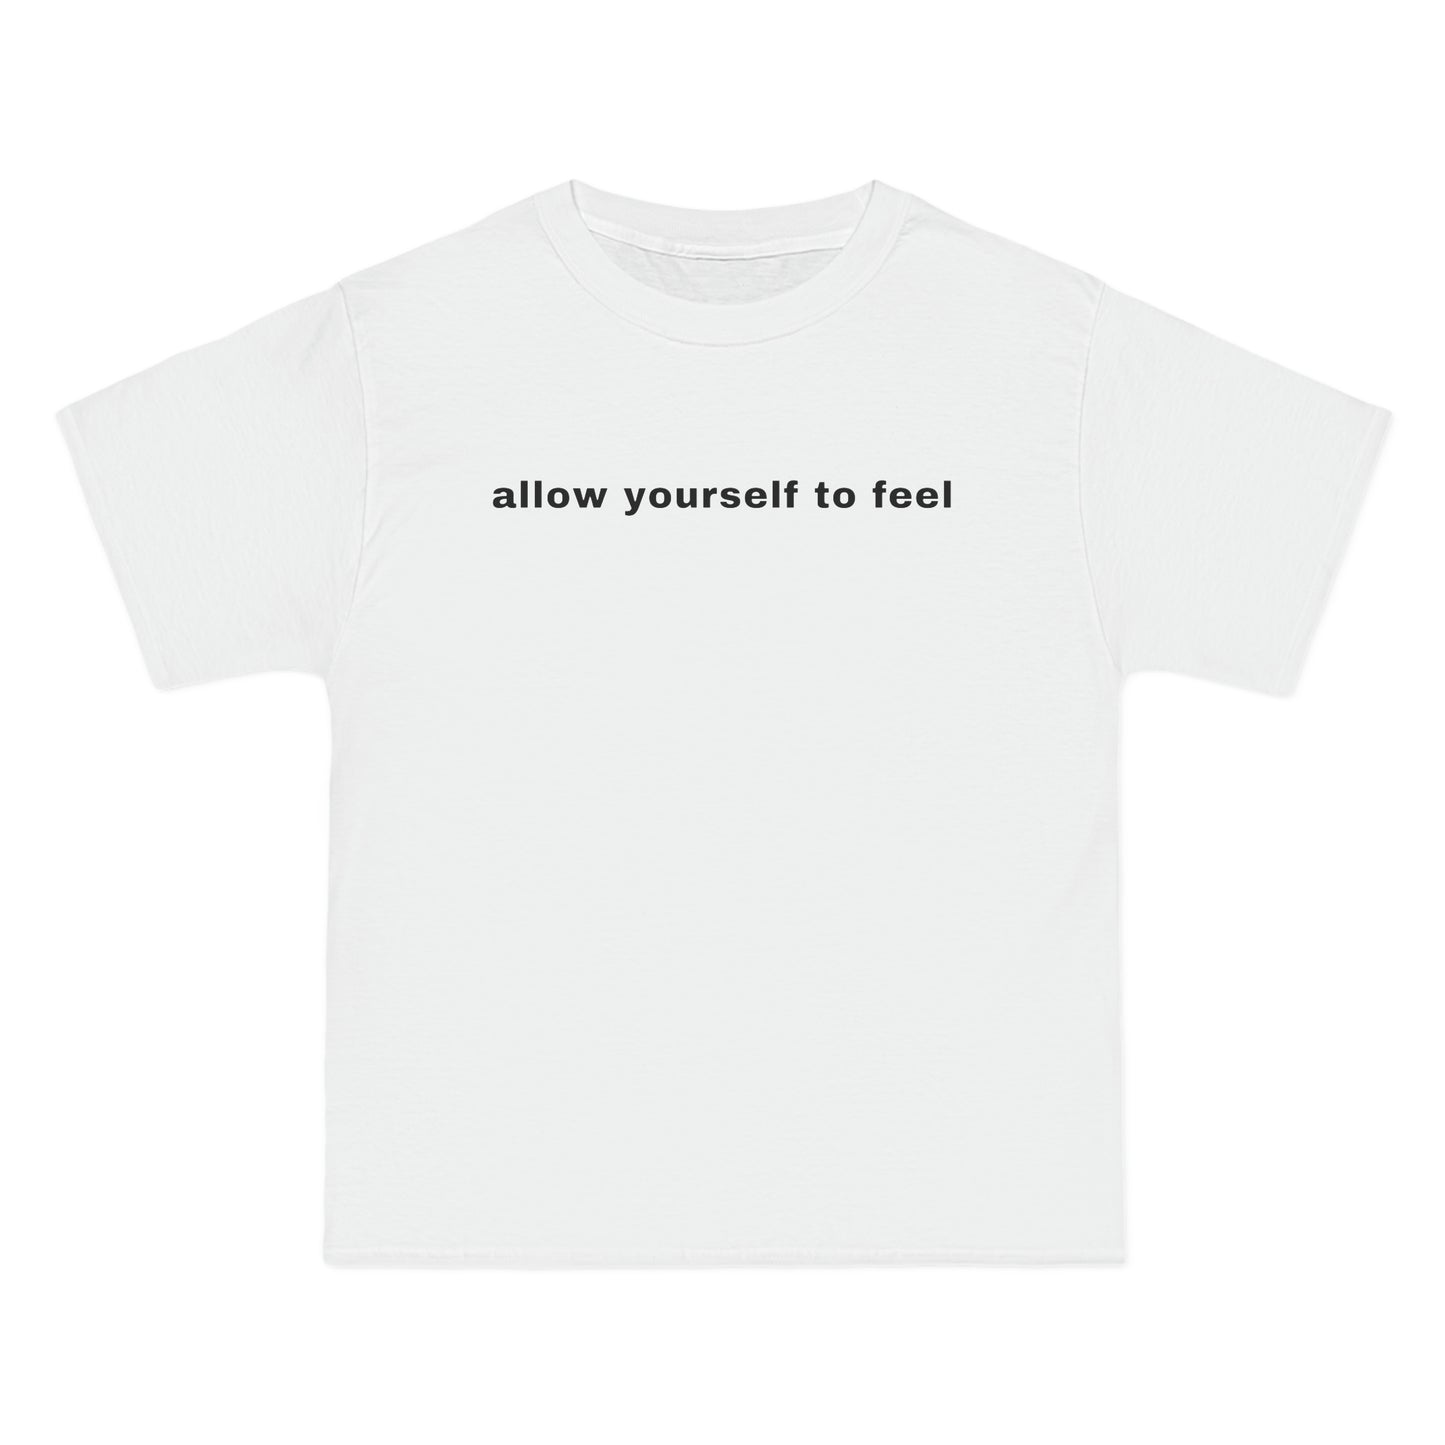 allow yourself to feel Tee